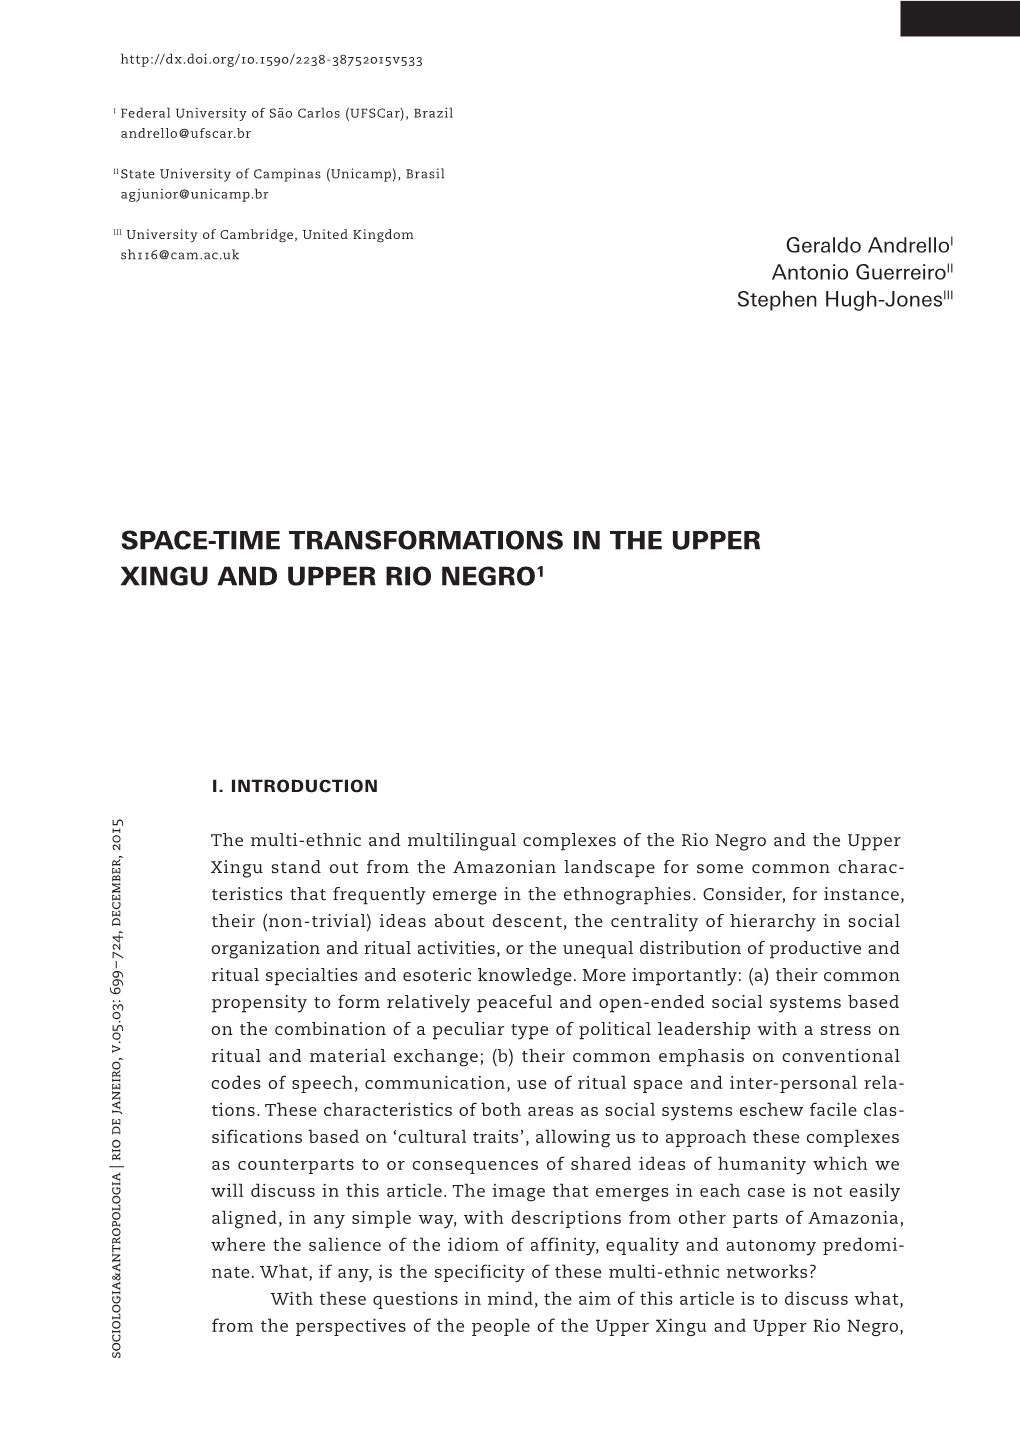 Space-Time Transformations in the Upper Xingu and Upper Rio Negro1